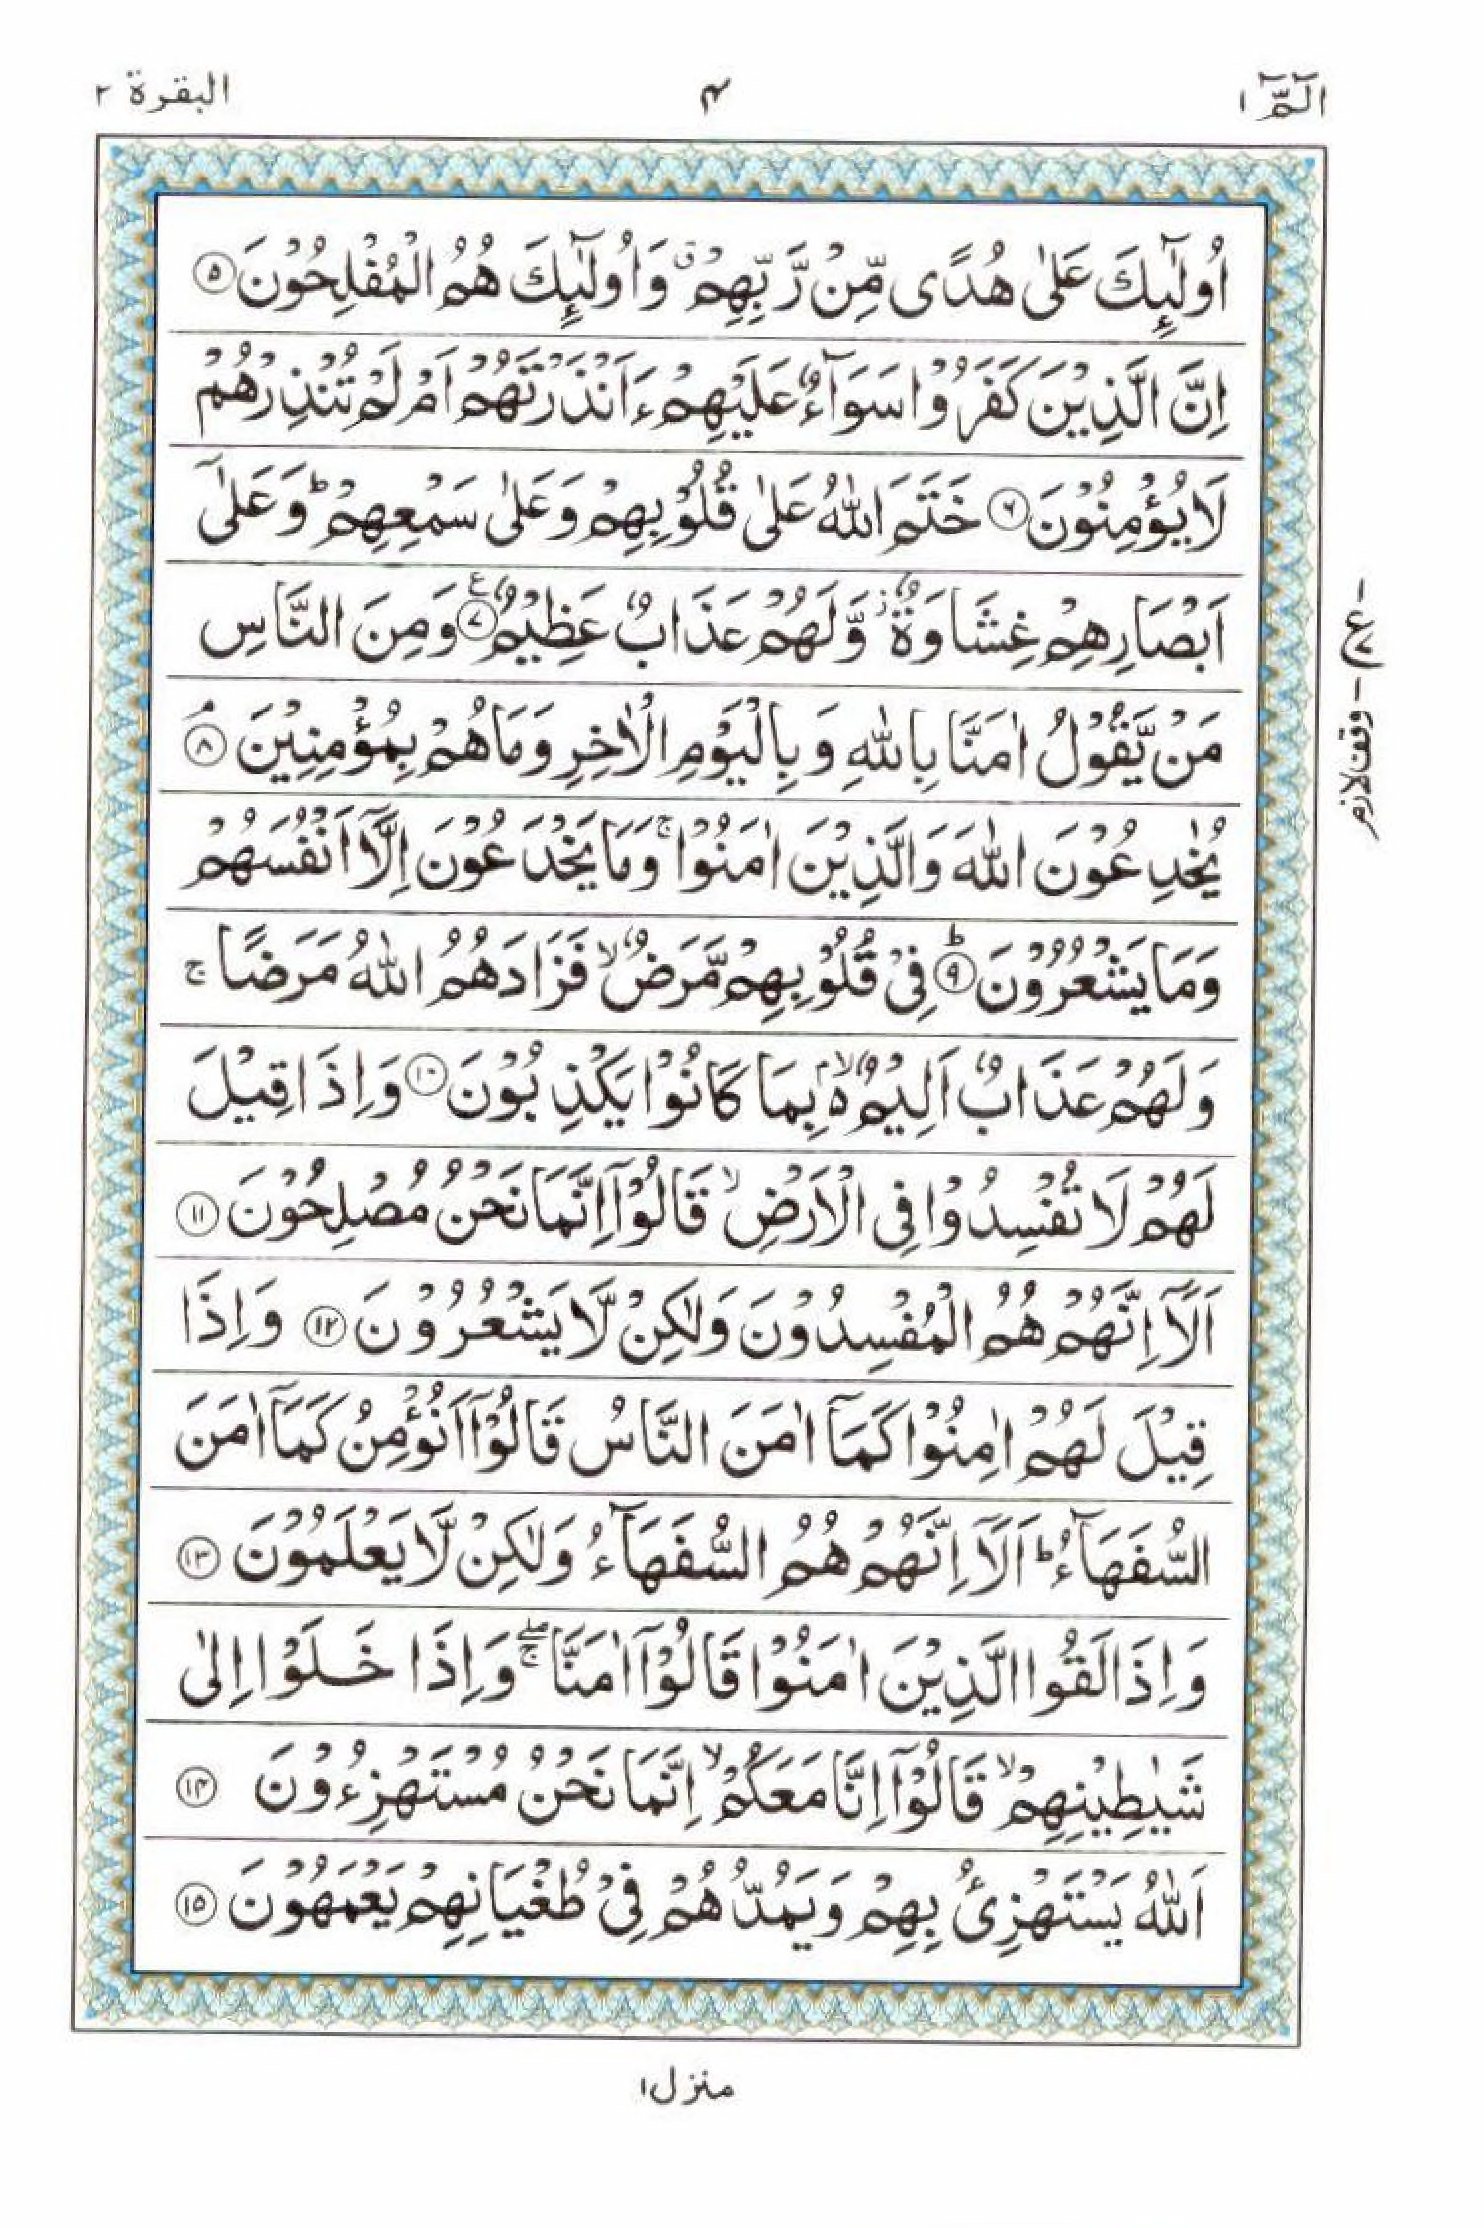 Read 15 Lines Quran, Part / Chapter / Siparah 1 Page 4